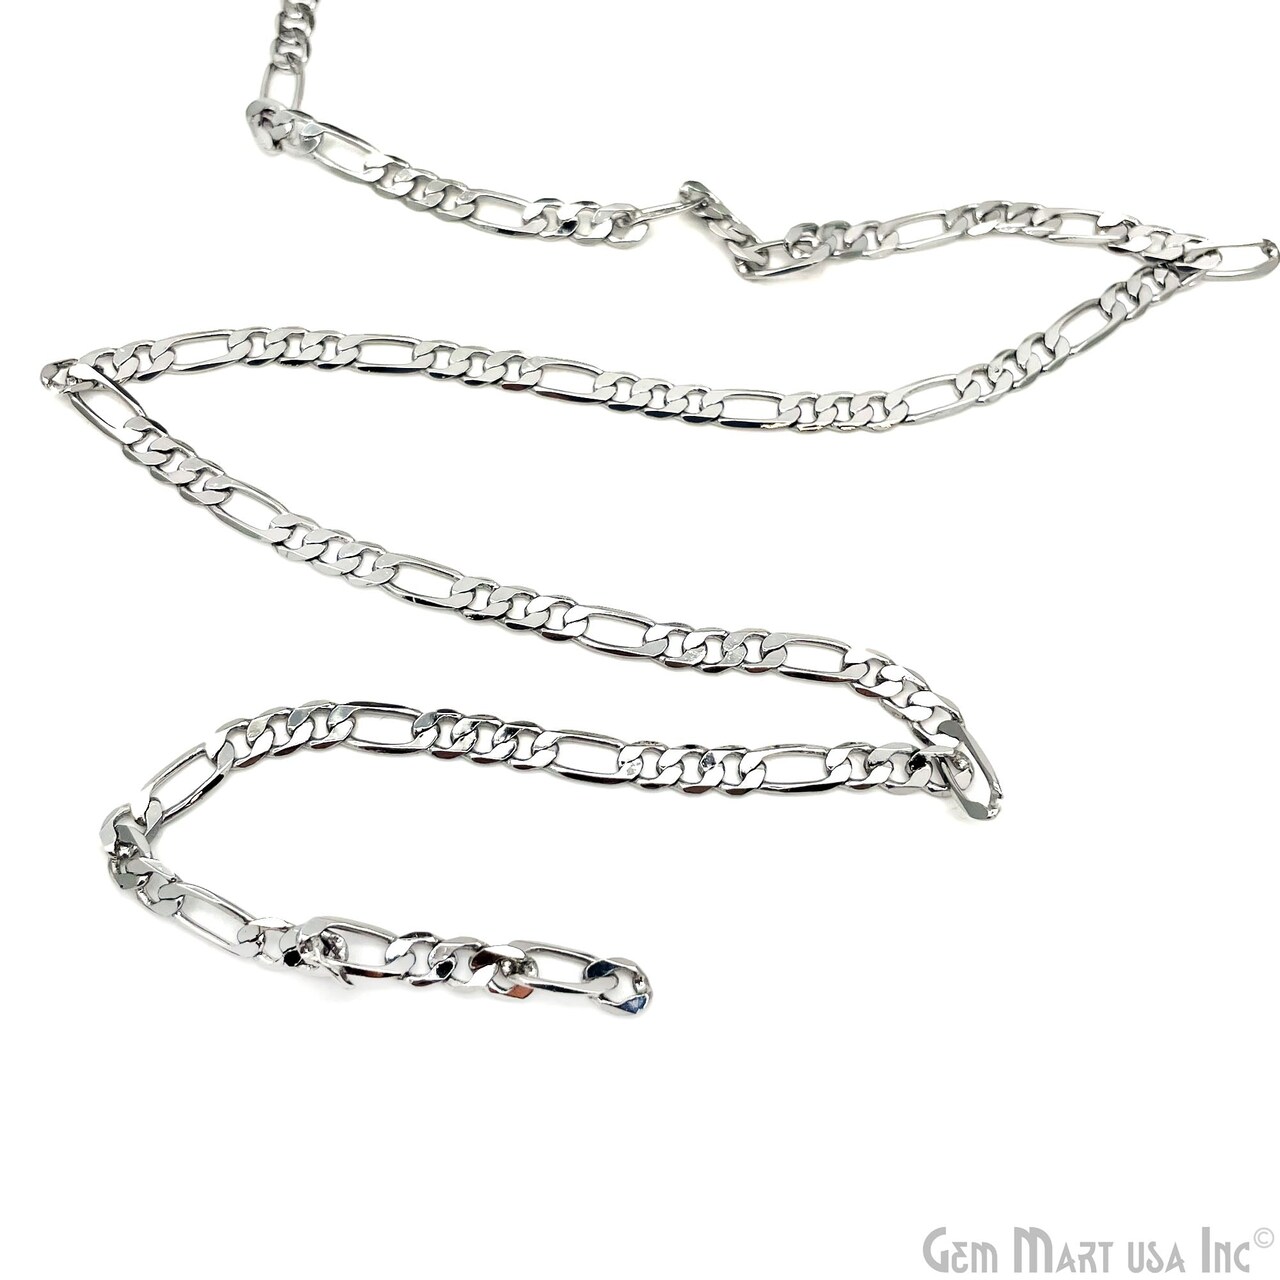 Silver Finding Chain, Silver Plated Jewelry Making Chain, DIY Necklace  Chain, Silver Purse Chain Replacement, Assorted Styles, 1 foot, GemMartUSA